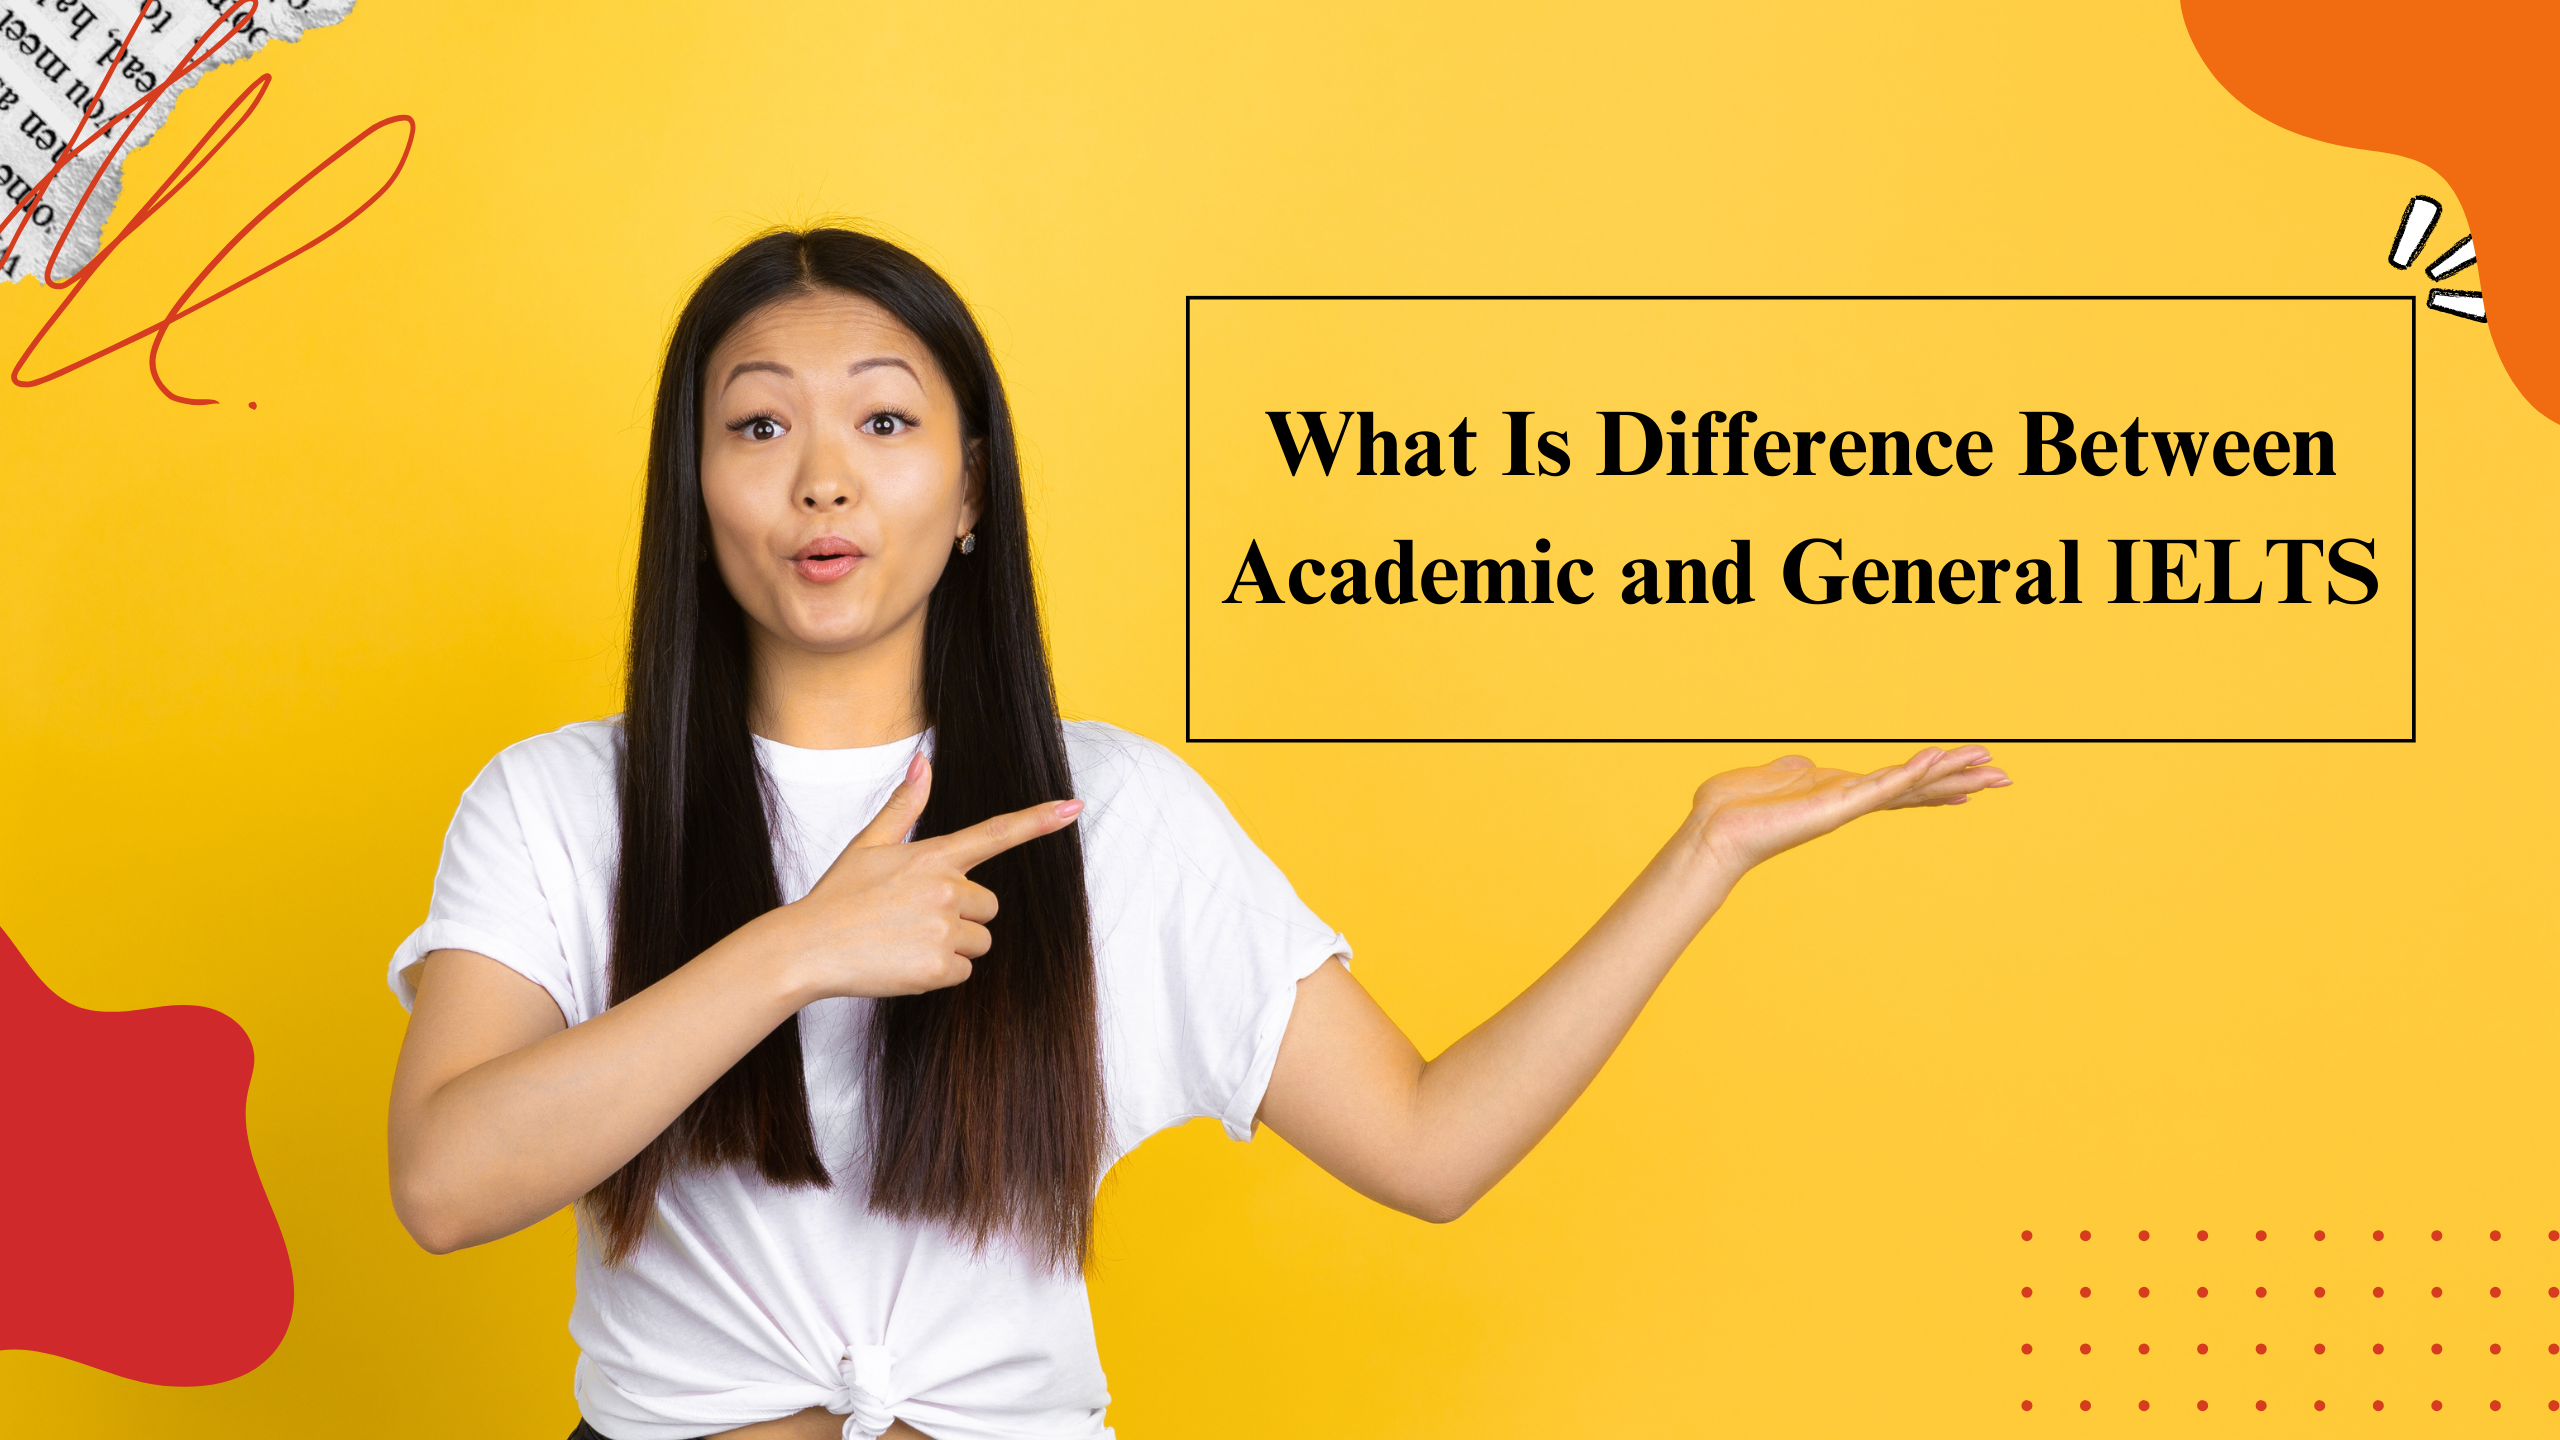 What Is Difference Between Academic and General IELTS